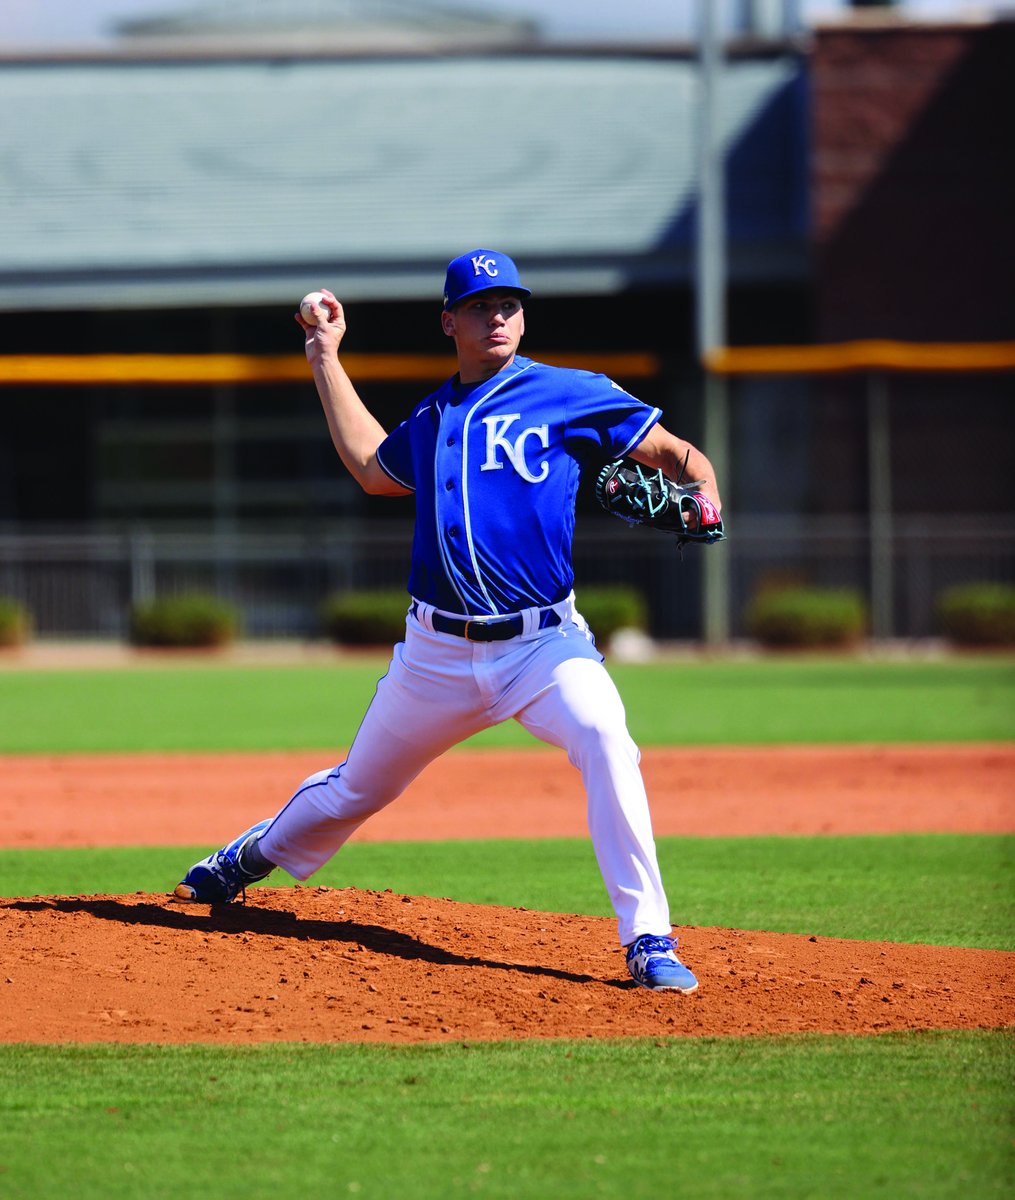 After his 2023 struggle, Ben Kudrna reported to spring training both physically and mentally stronger The @Royals prospect added a sinker to his four-seam fastball, slider and changeup. Even more important ... Kudrna has become a smarter pitcher ⬇️ baseballamerica.com/stories/adjust…